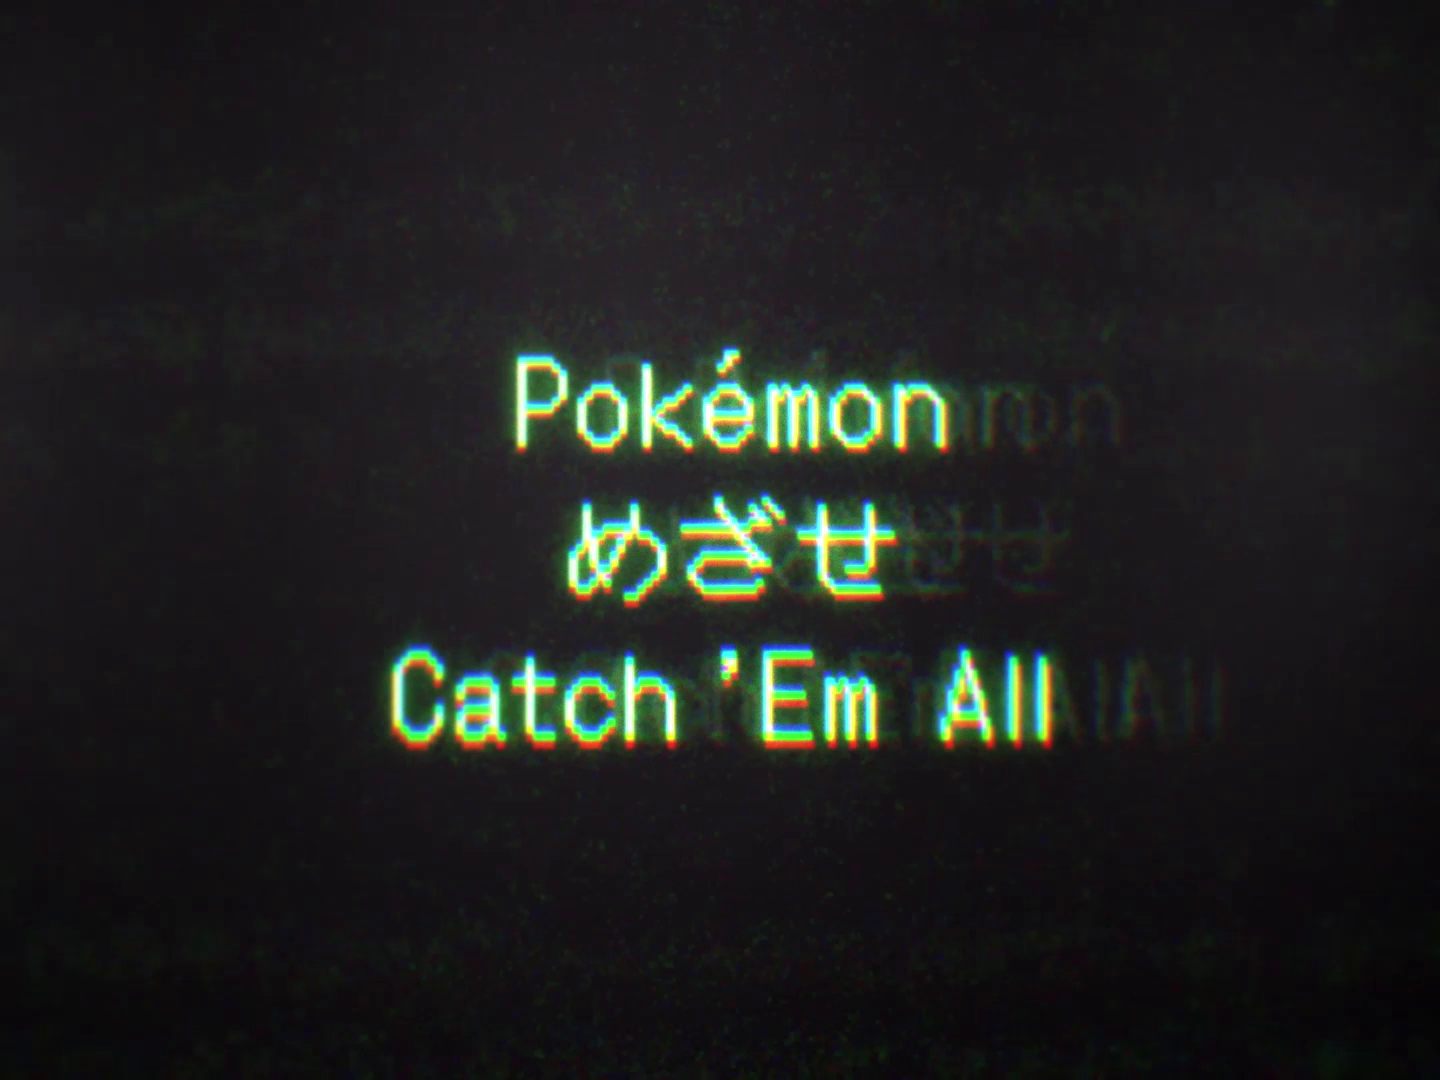 「Pokémon めざせ Catch 'Em All (Night Tempo Official Mashup)」